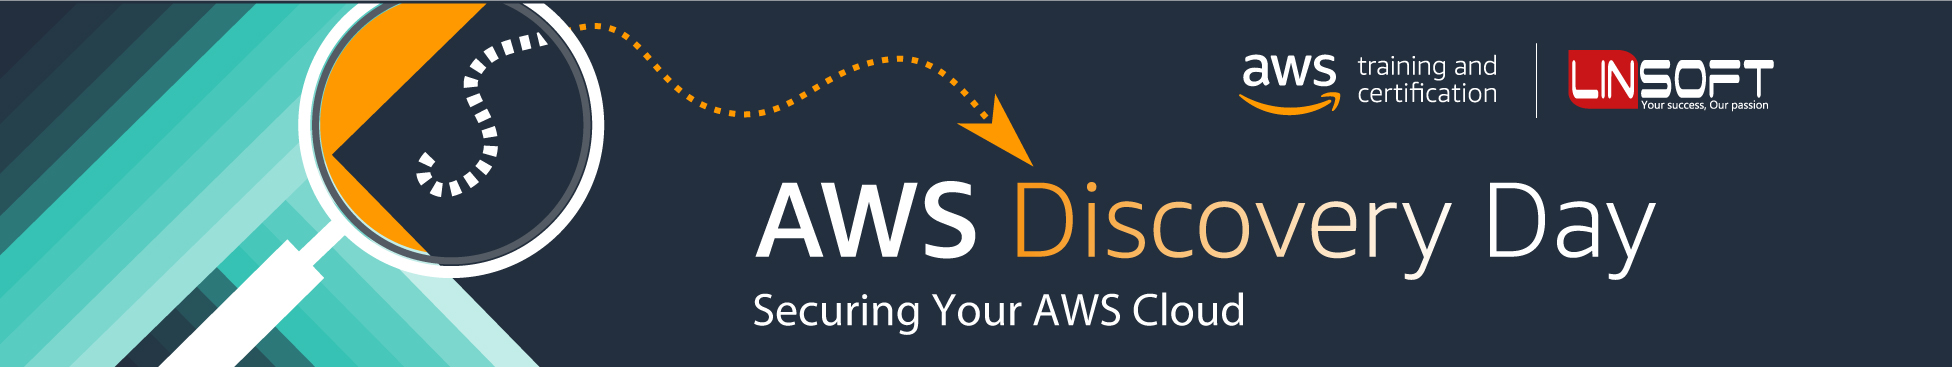 aws-discovery-day-securing-your-aws-cloud